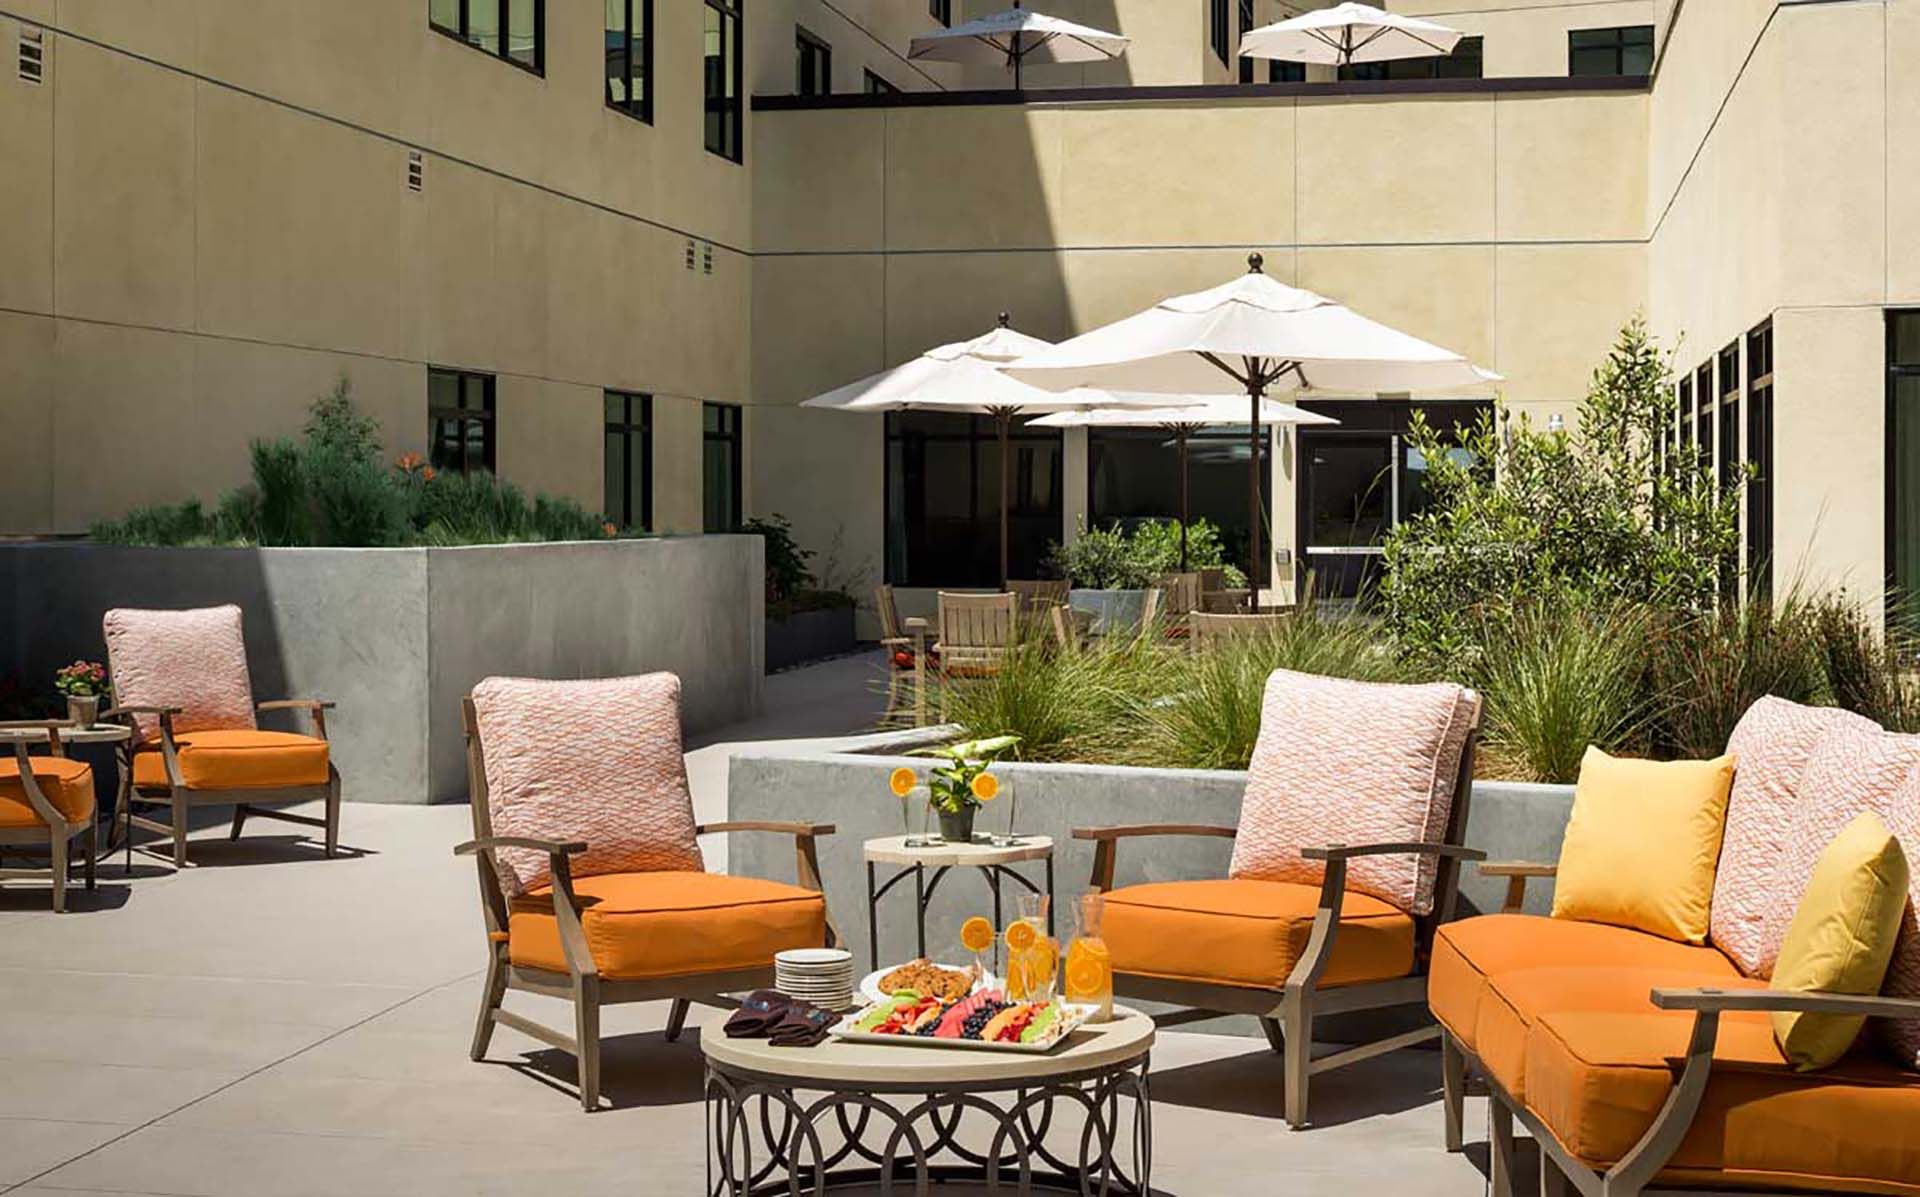 Senior living community, Atria At Foster Square, featuring modern architecture and cozy patio furniture.